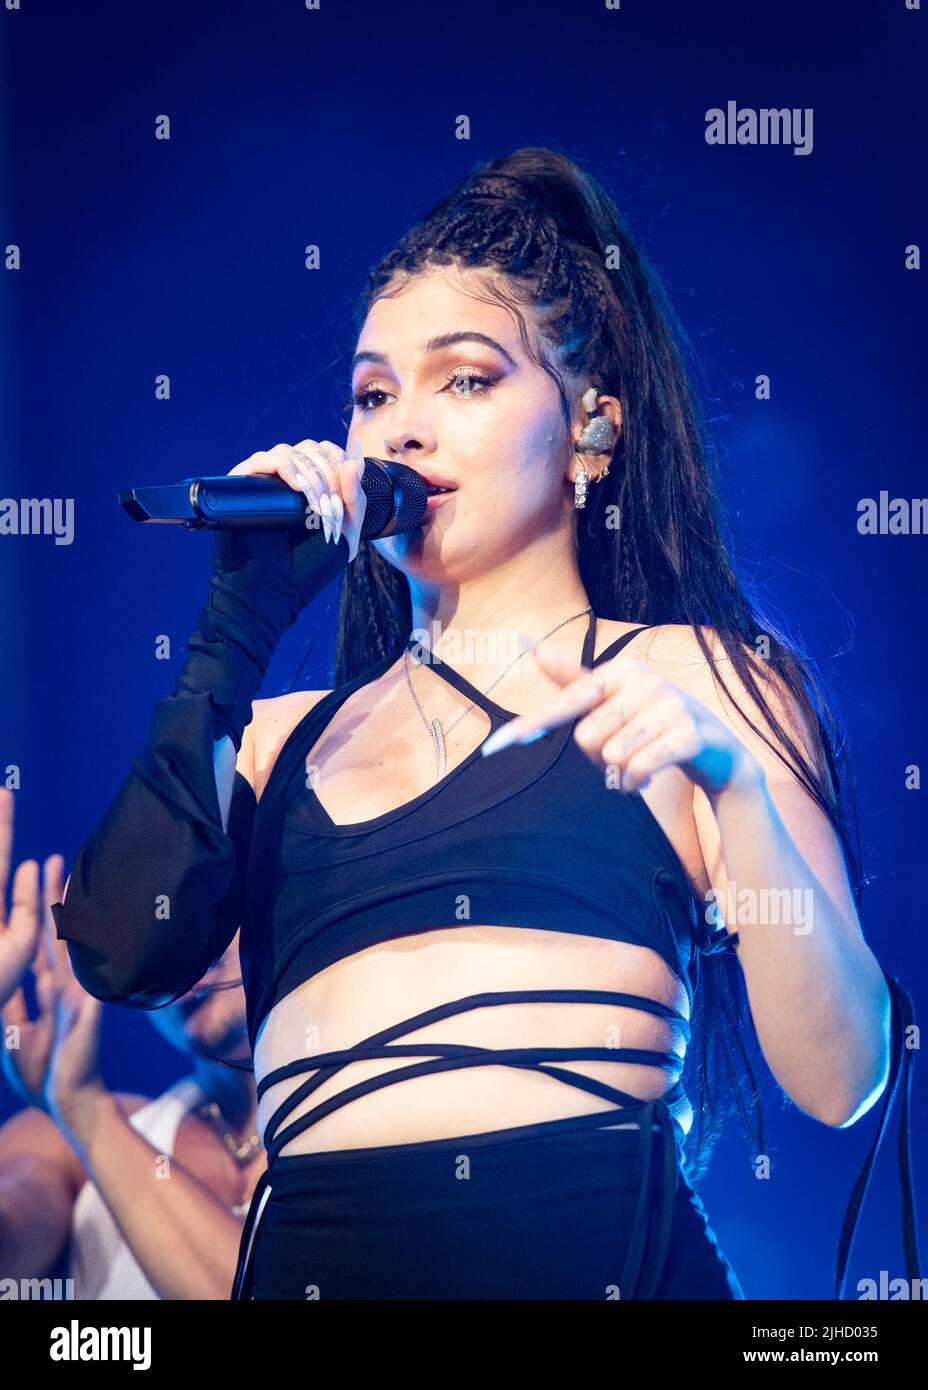 London, UK, Sunday, 17th July 2022 Mabel performs live on stage as part of the Somerset House Summer Series 2022, Somerset House, The Strand. Credit: DavidJensen / Empics Entertainment / Alamy Live News Stock Photo